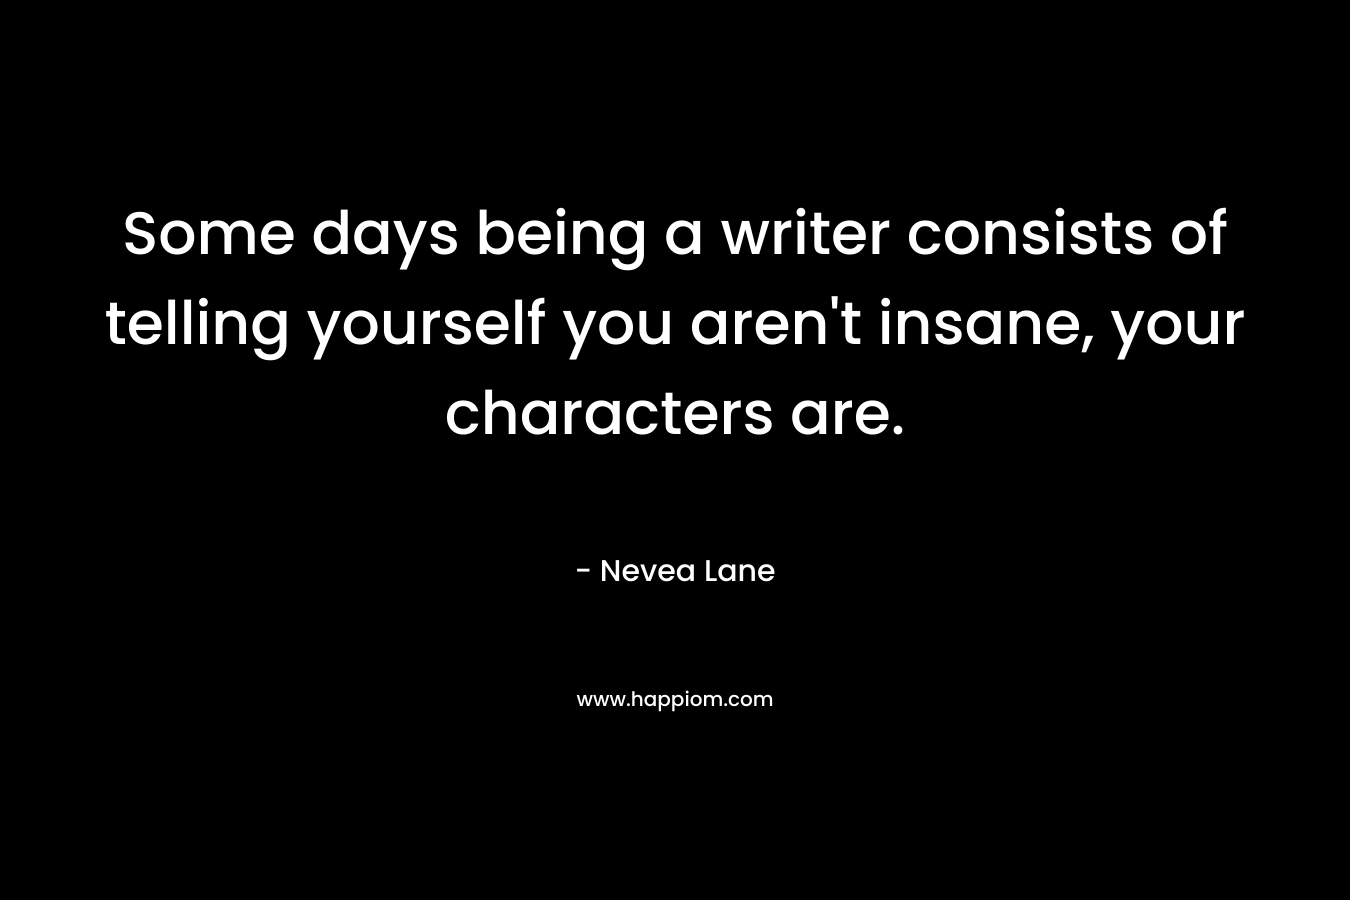 Some days being a writer consists of telling yourself you aren't insane, your characters are.